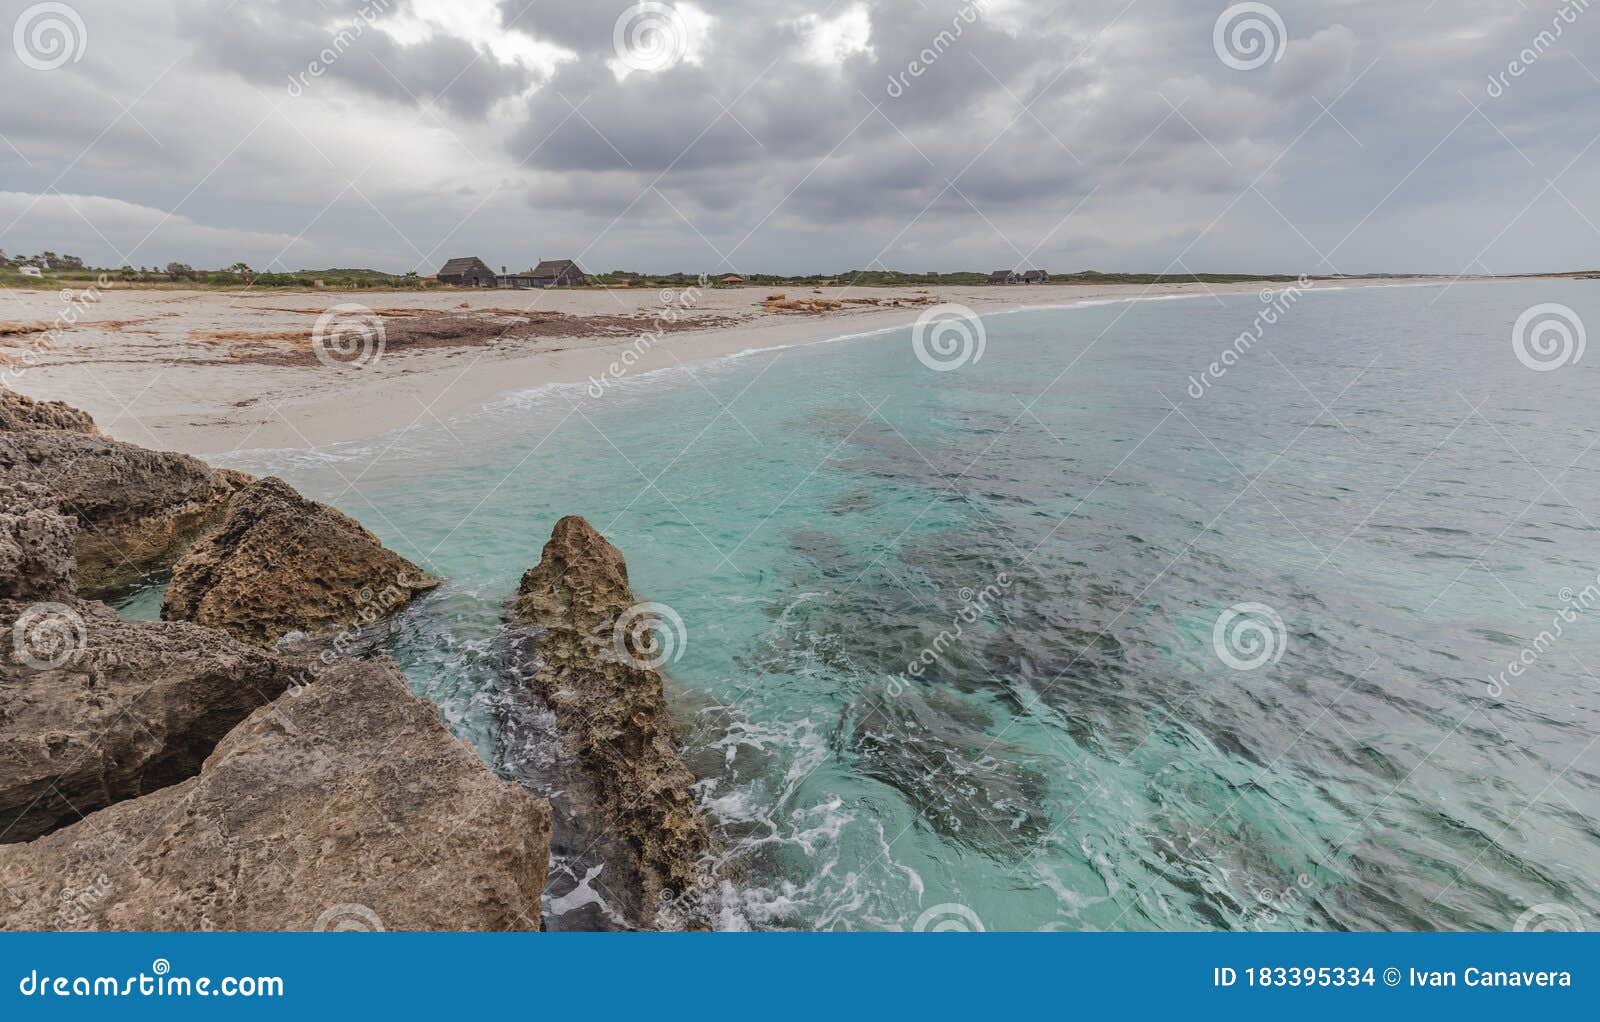 Is Arutas Beach Wonderful Beach Famous For Its Crystal Beans Stock Photo Image Of Nature Ovest